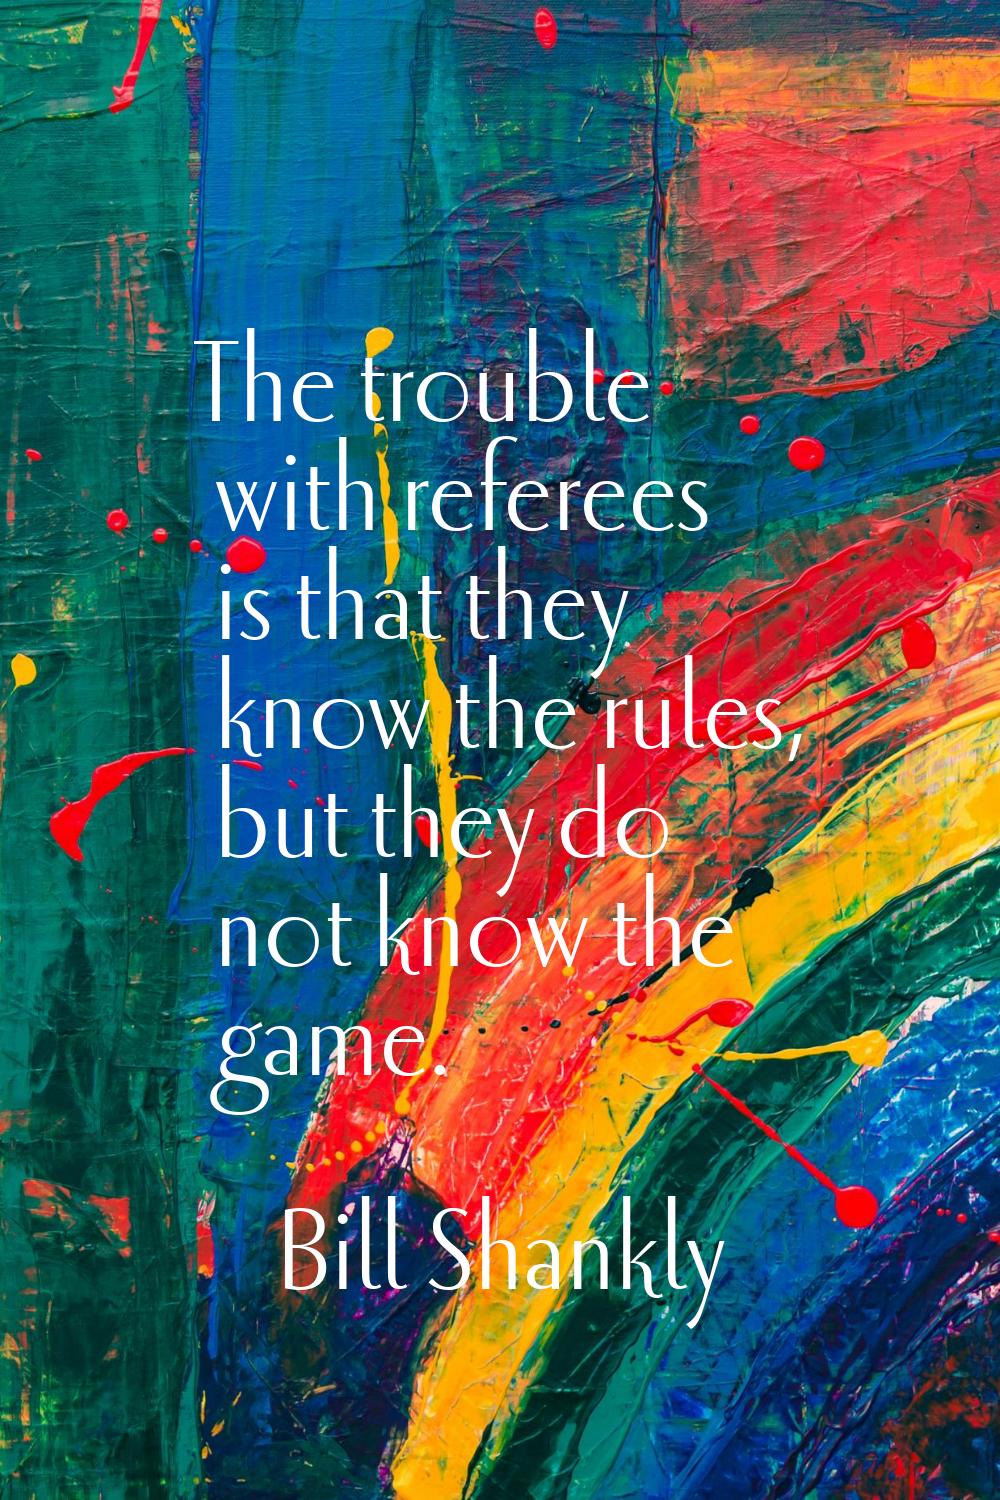 The trouble with referees is that they know the rules, but they do not know the game.